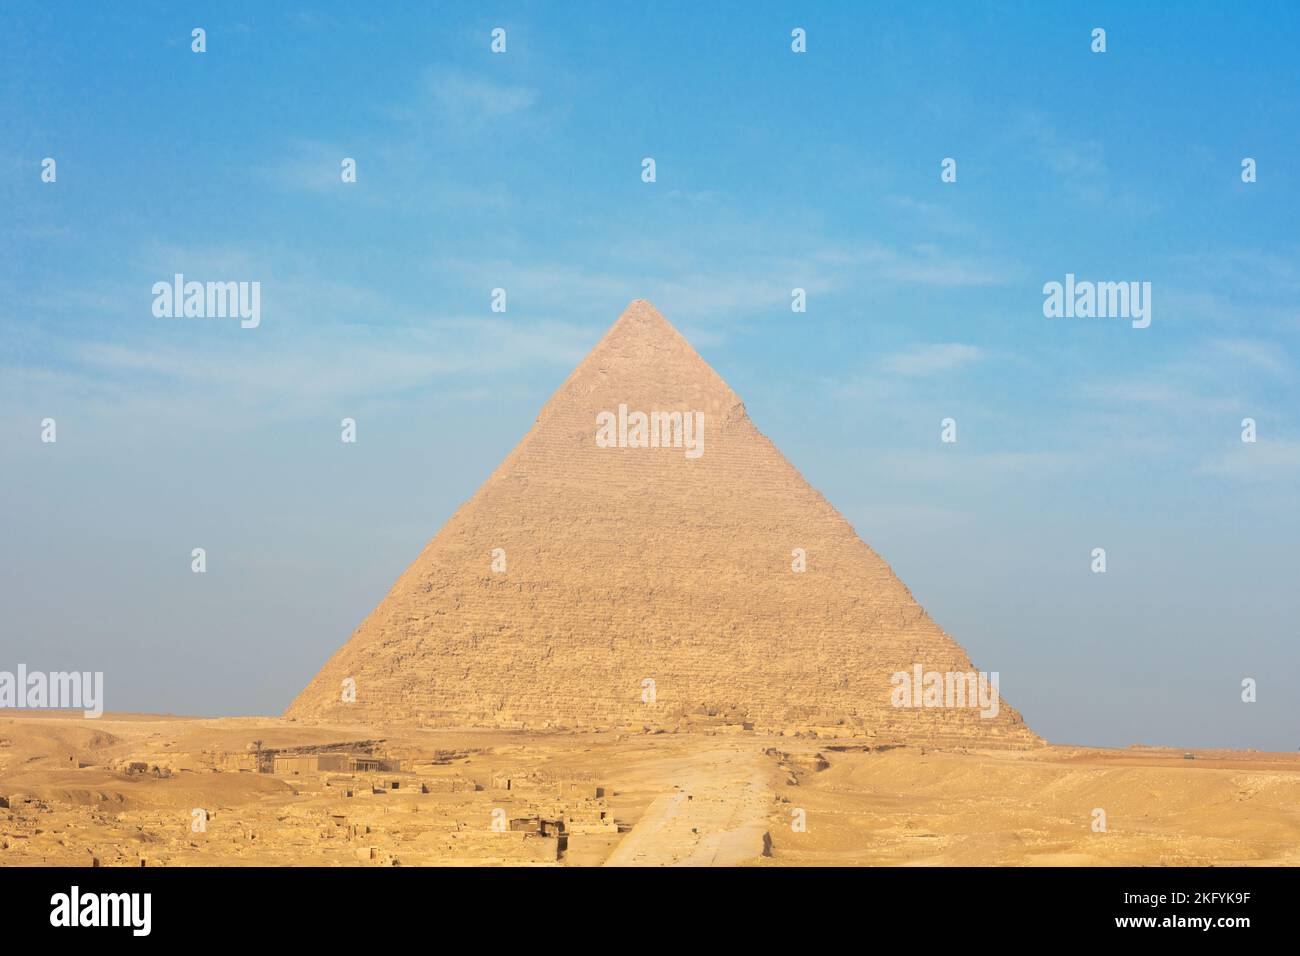 Famous Egyptian Pyramids of Giza. Landscape in Egypt. Pyramid in desert. Africa. Wonder of the World. Stock Photo